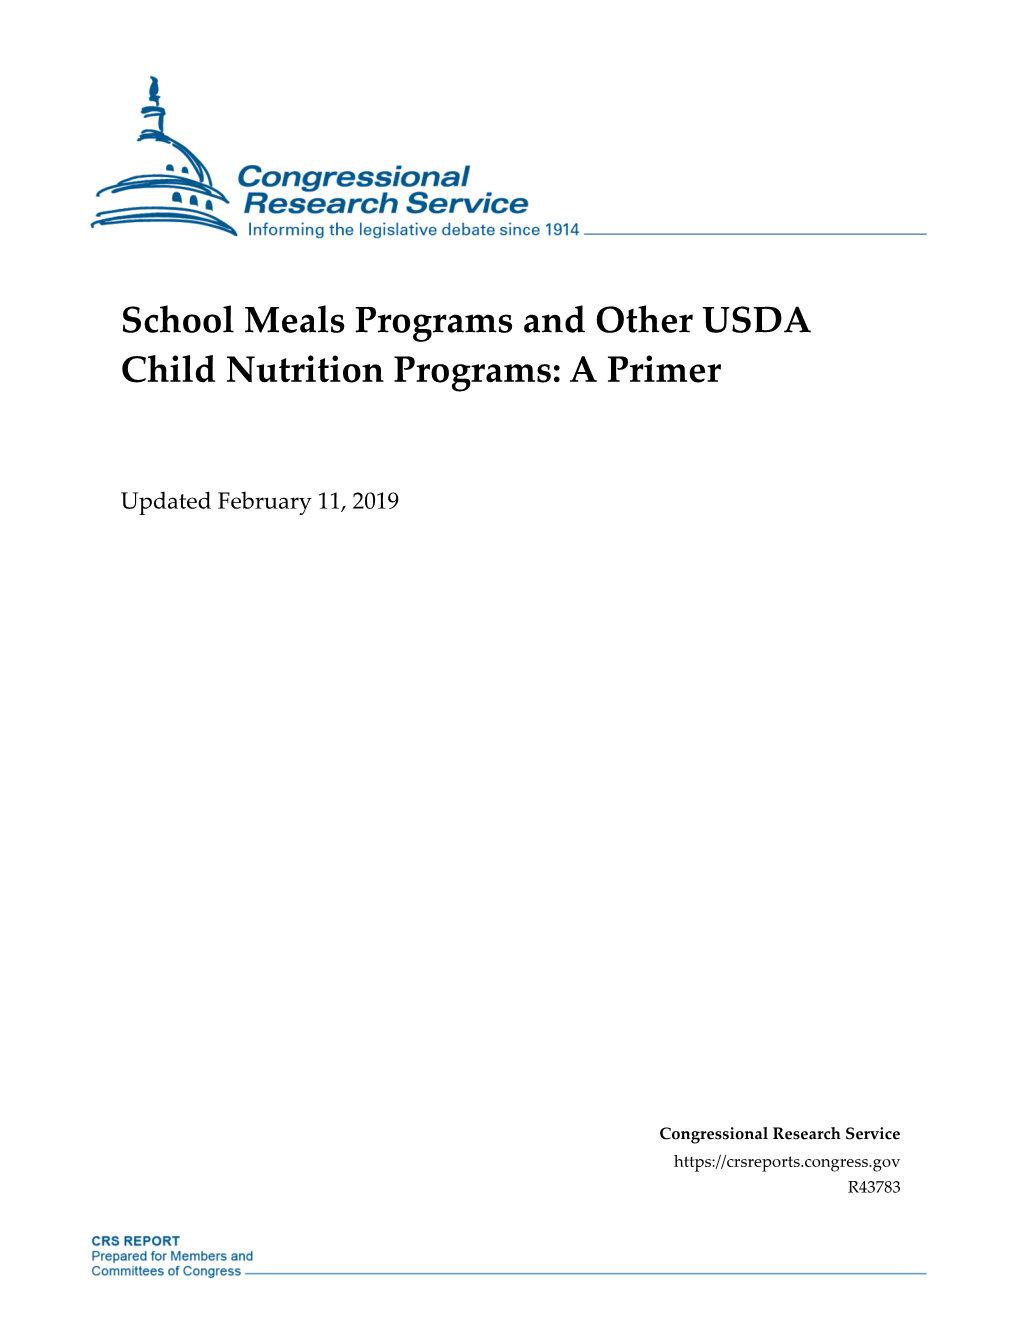 School Meals Programs and Other USDA Child Nutrition Programs: a Primer